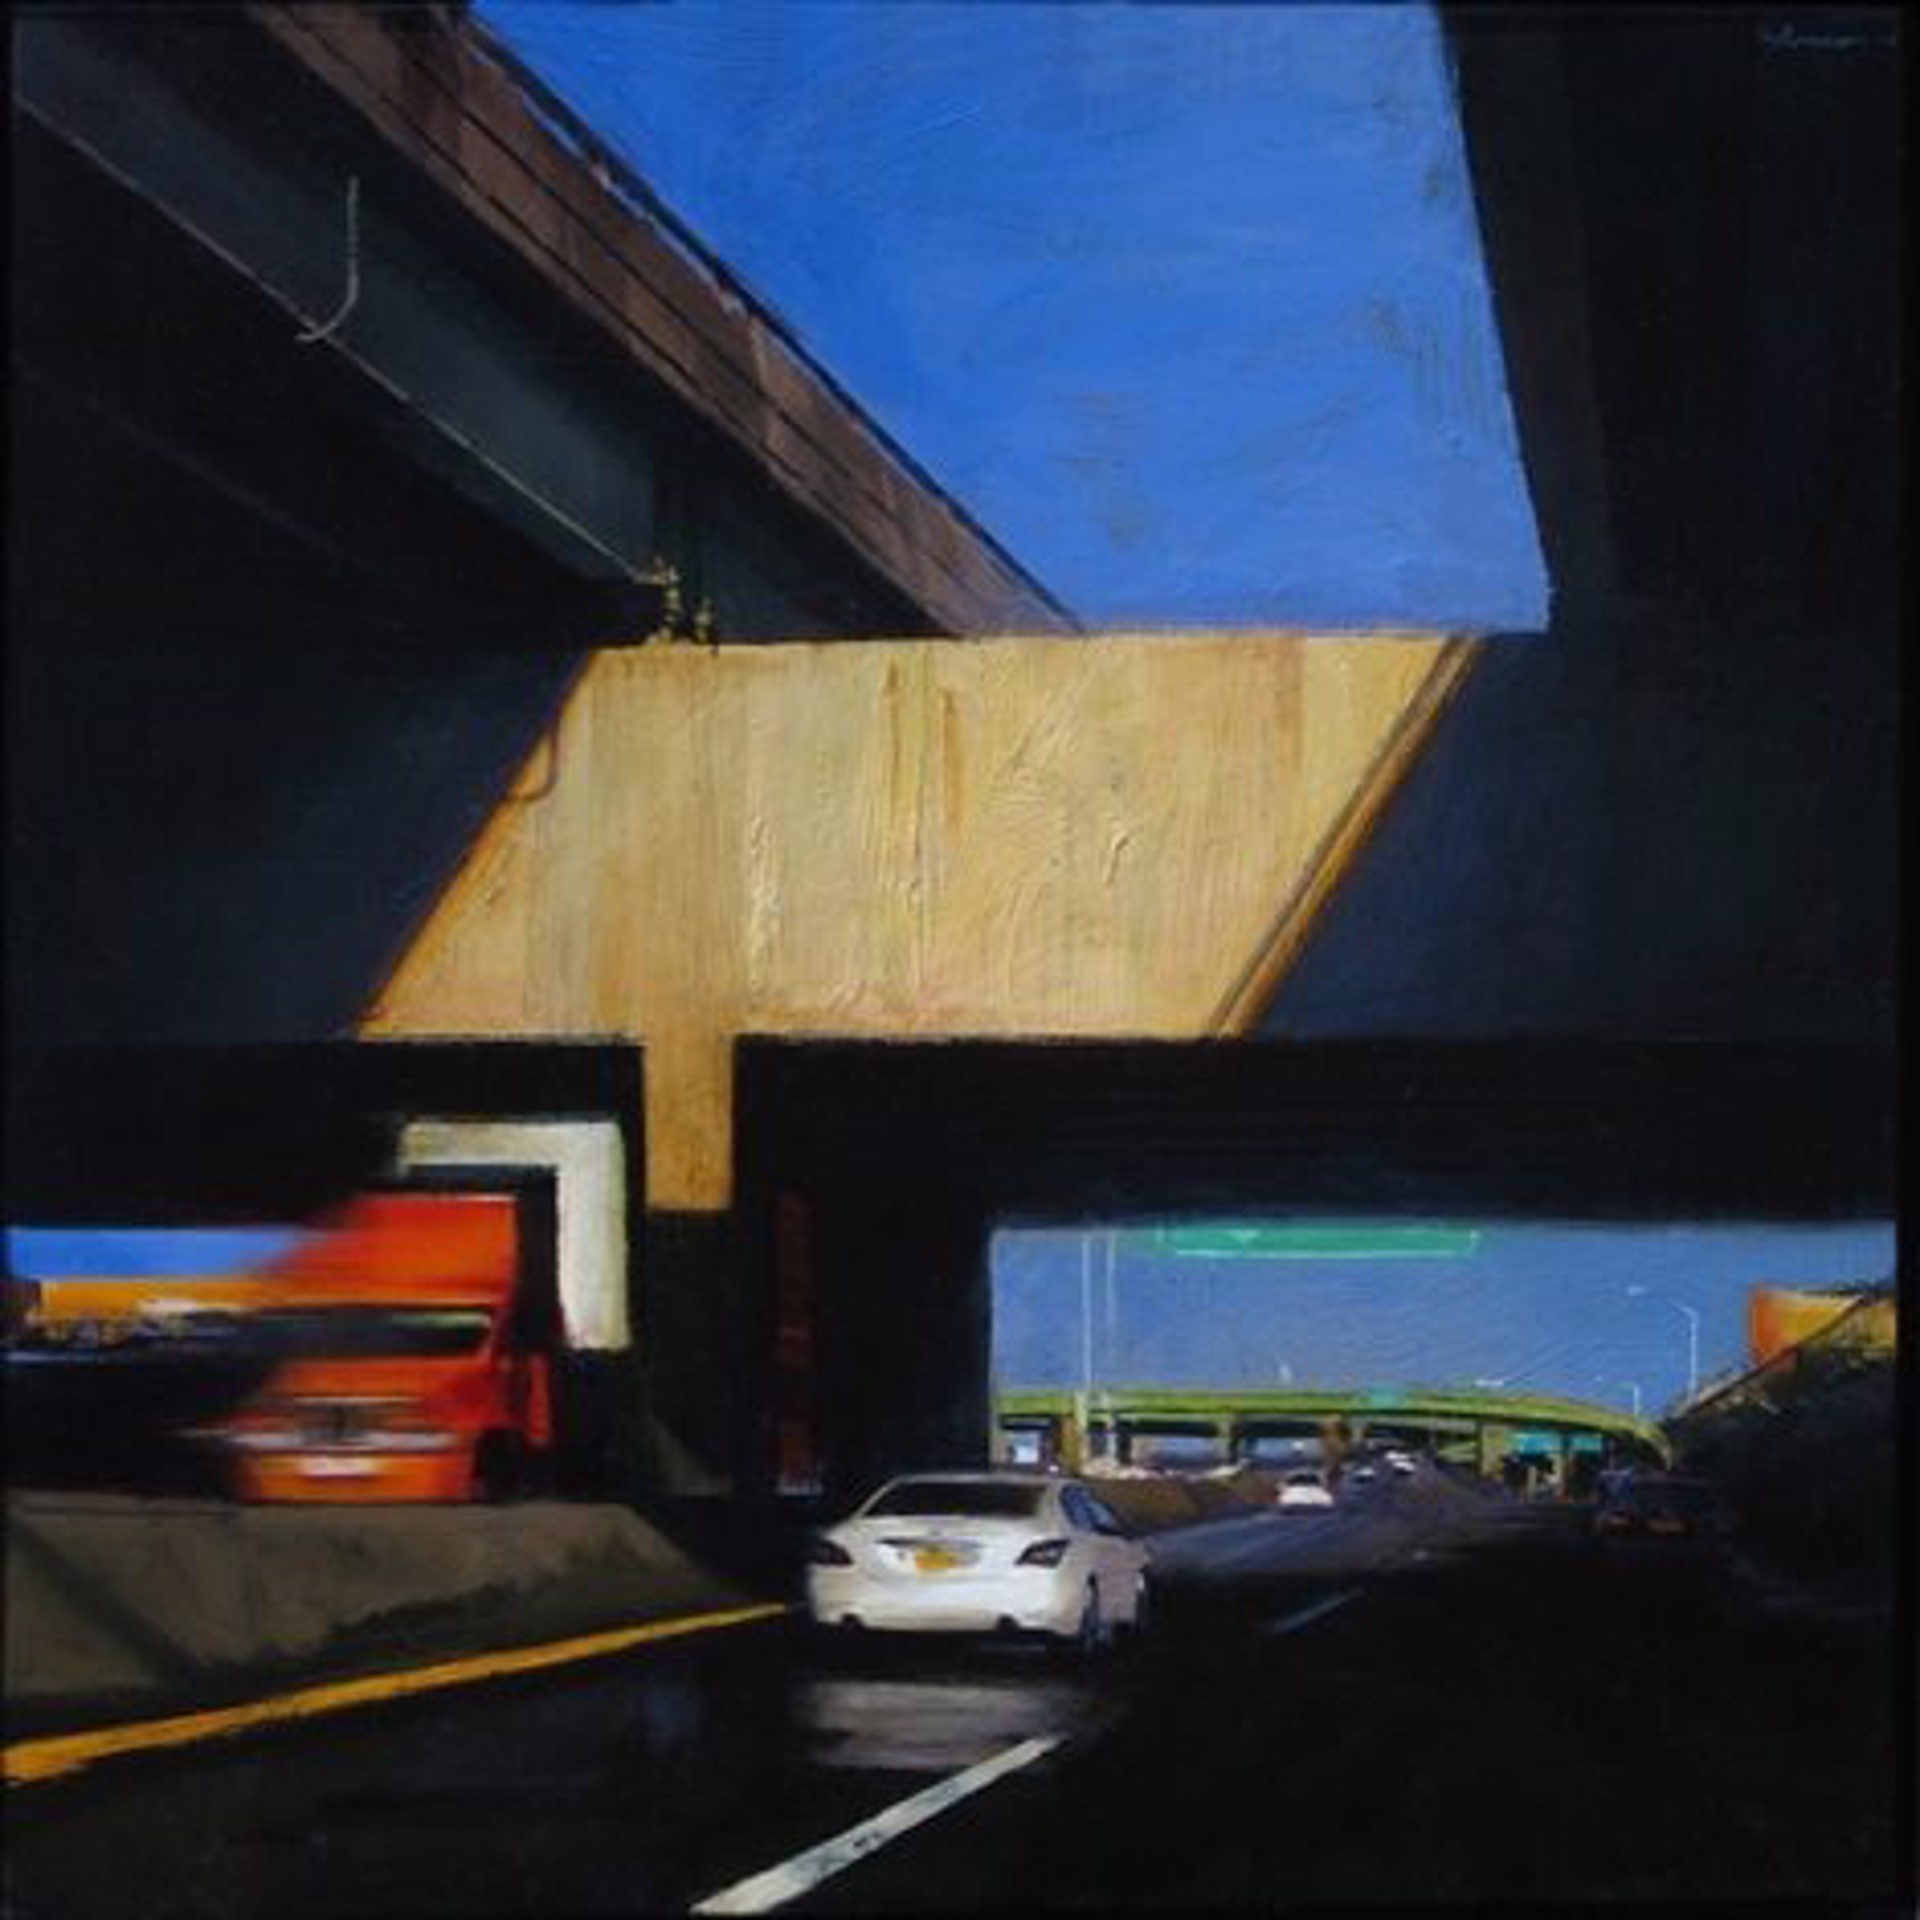 Divided Highway, Closed Ramp Series by Ben Aronson